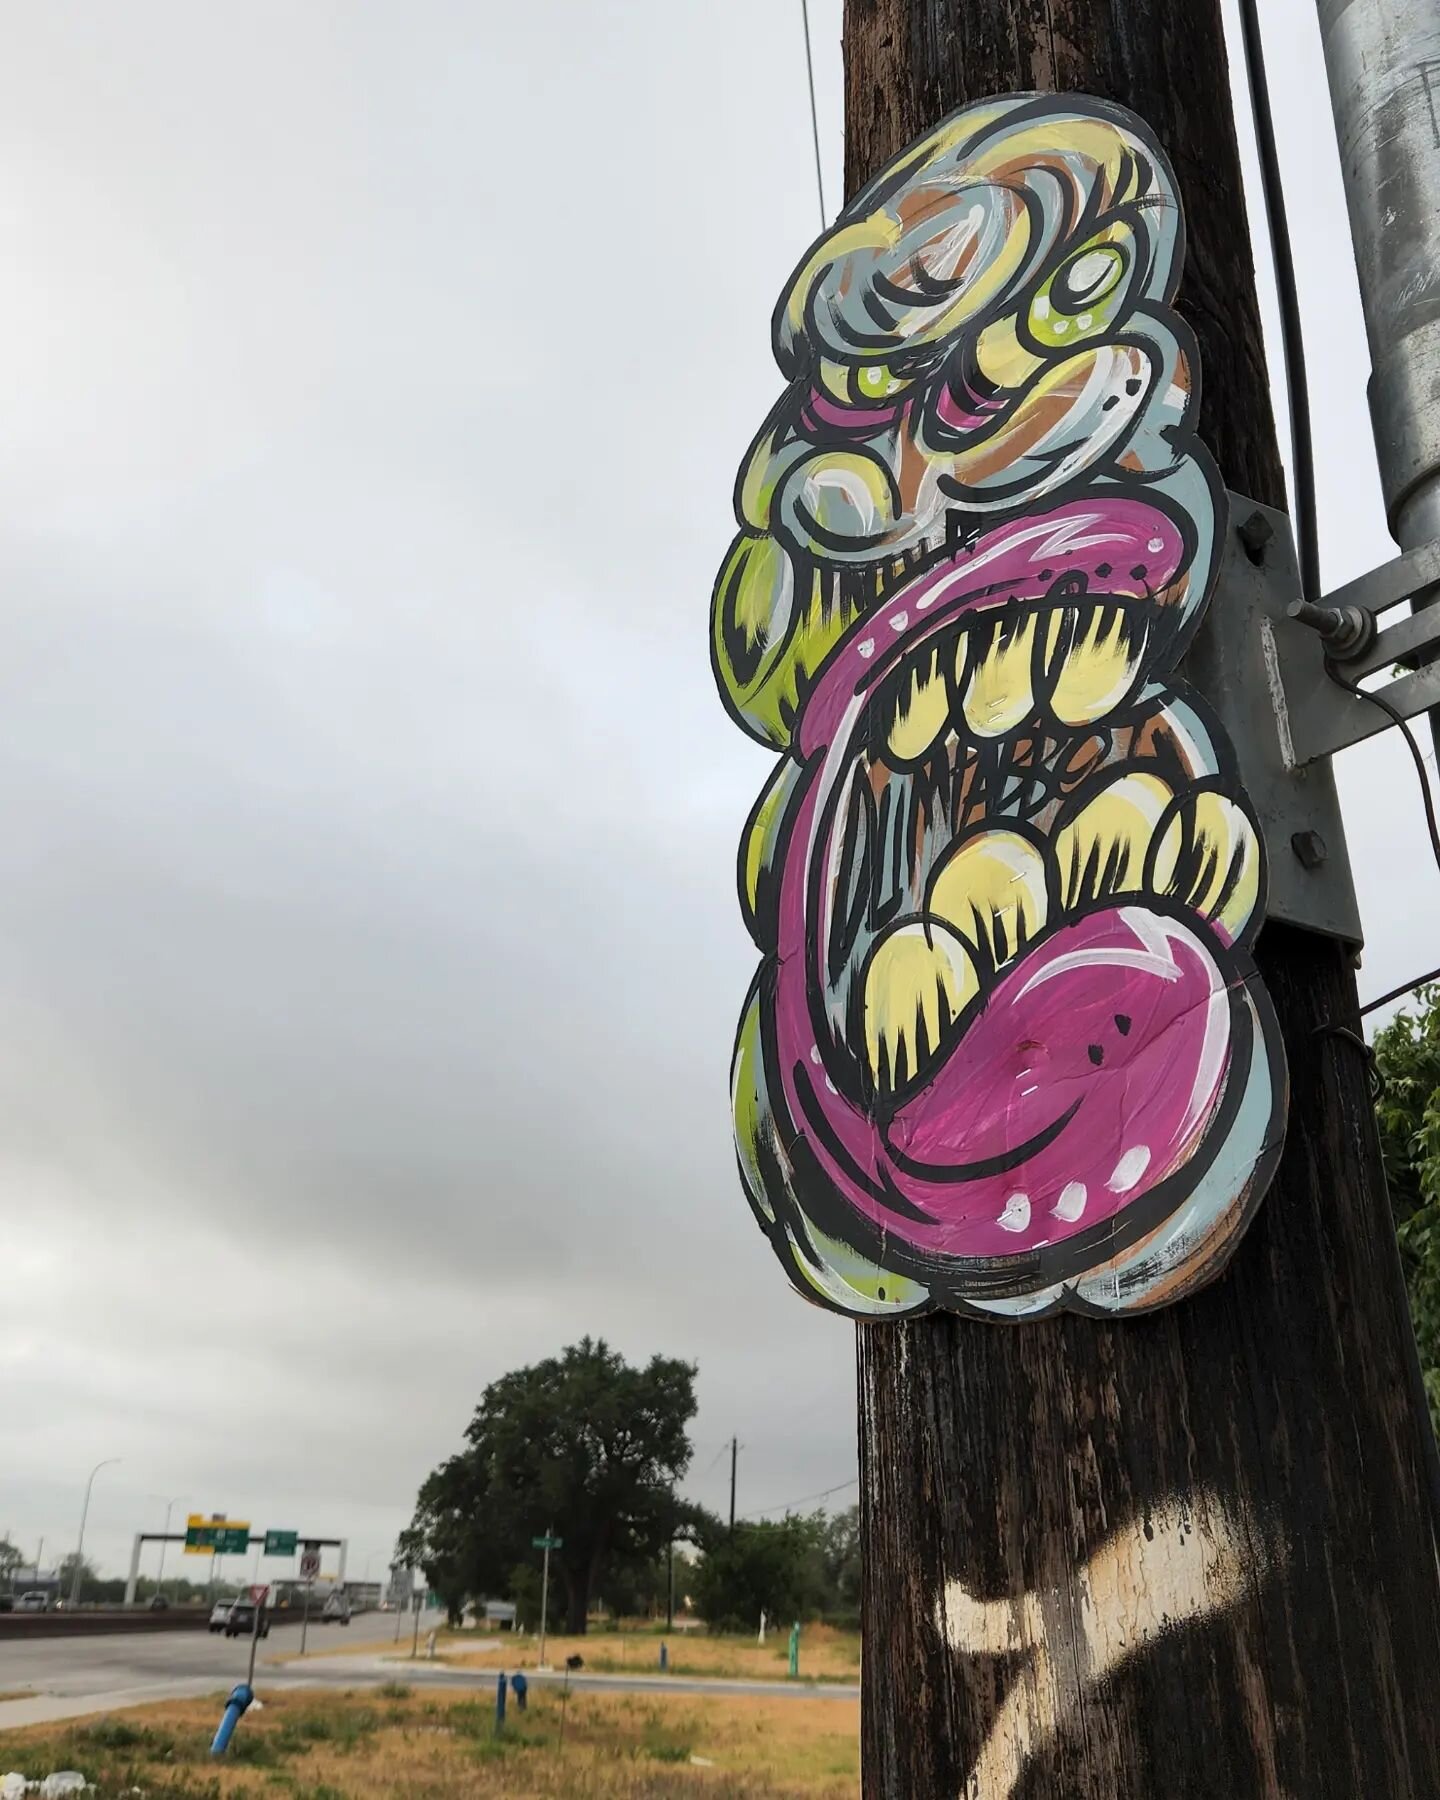 Oh, what a beautiful mornin'
Oh, what a beautiful day
I've got a beautiful feelin'
Everything's goin' my way

#angrycloud #angryclouds #austin #atx #Texas #art #Streetart #character #recycle #creativereuse #drawing #painting #artistsoninstagram #arti